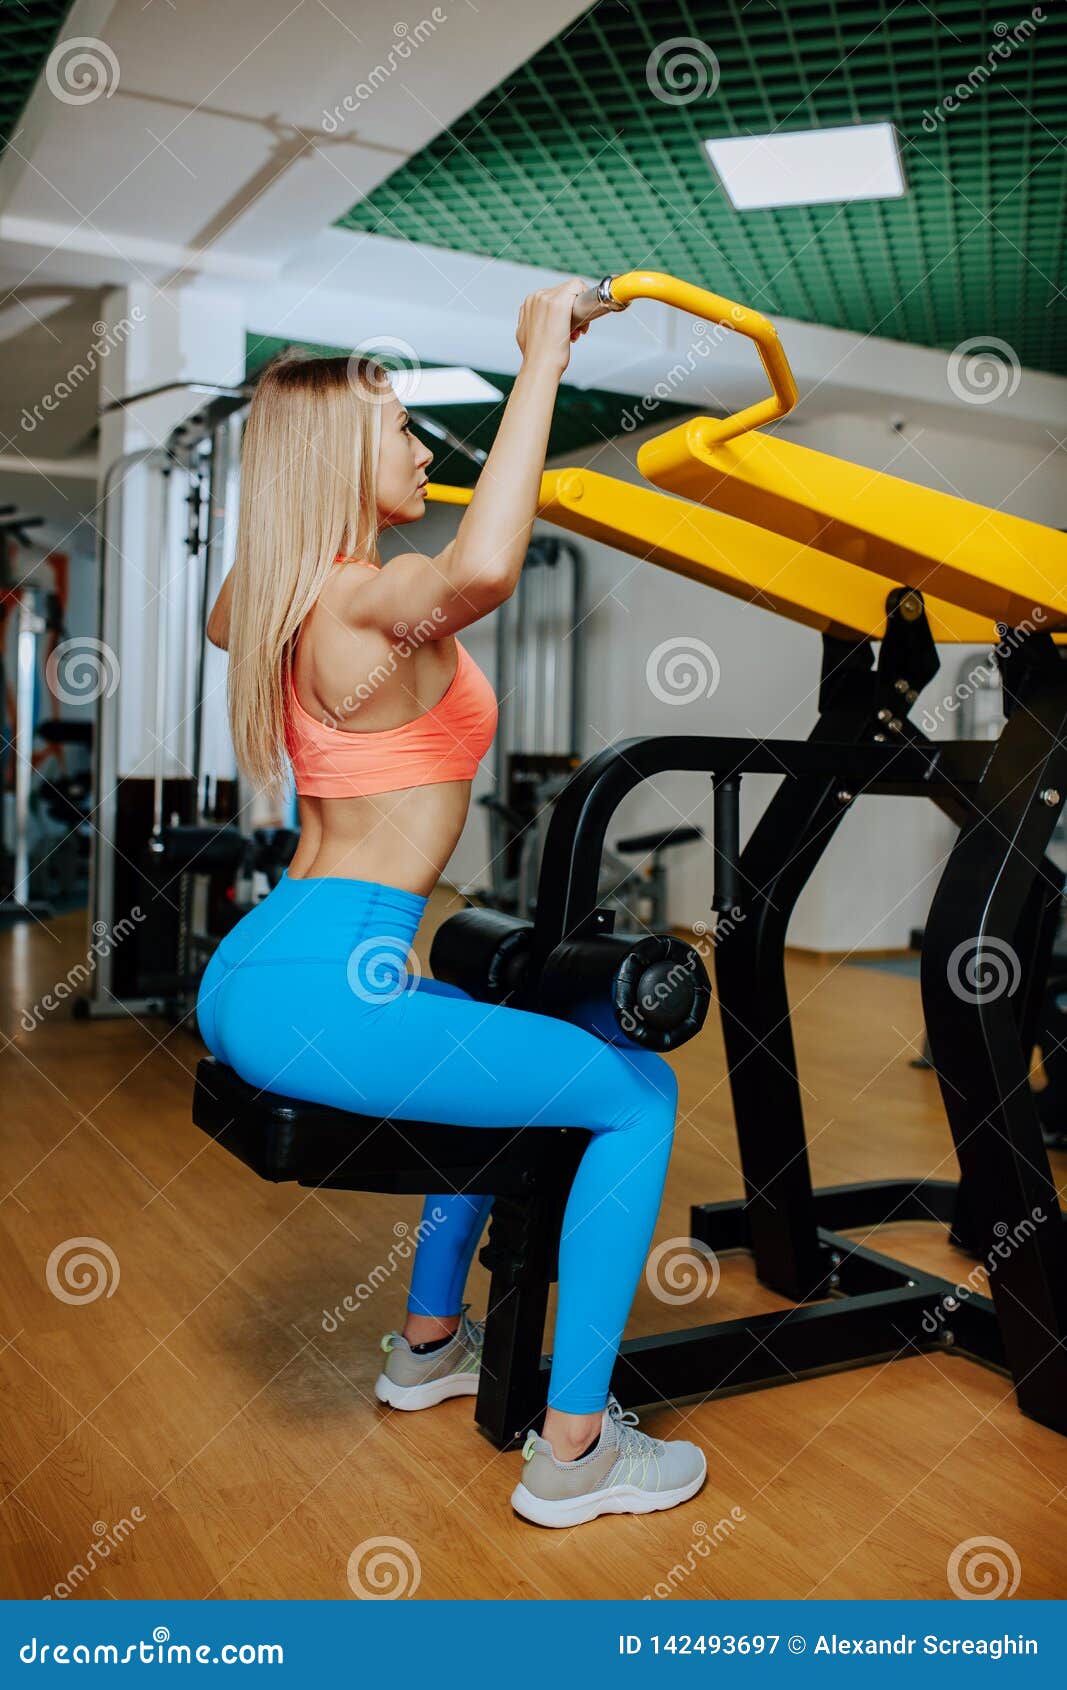 Fit Young Blonde Woman Working at the Lat Pulldown Machine in the Gym.  Stock Image - Image of bodybuilding, lifestyle: 142493697